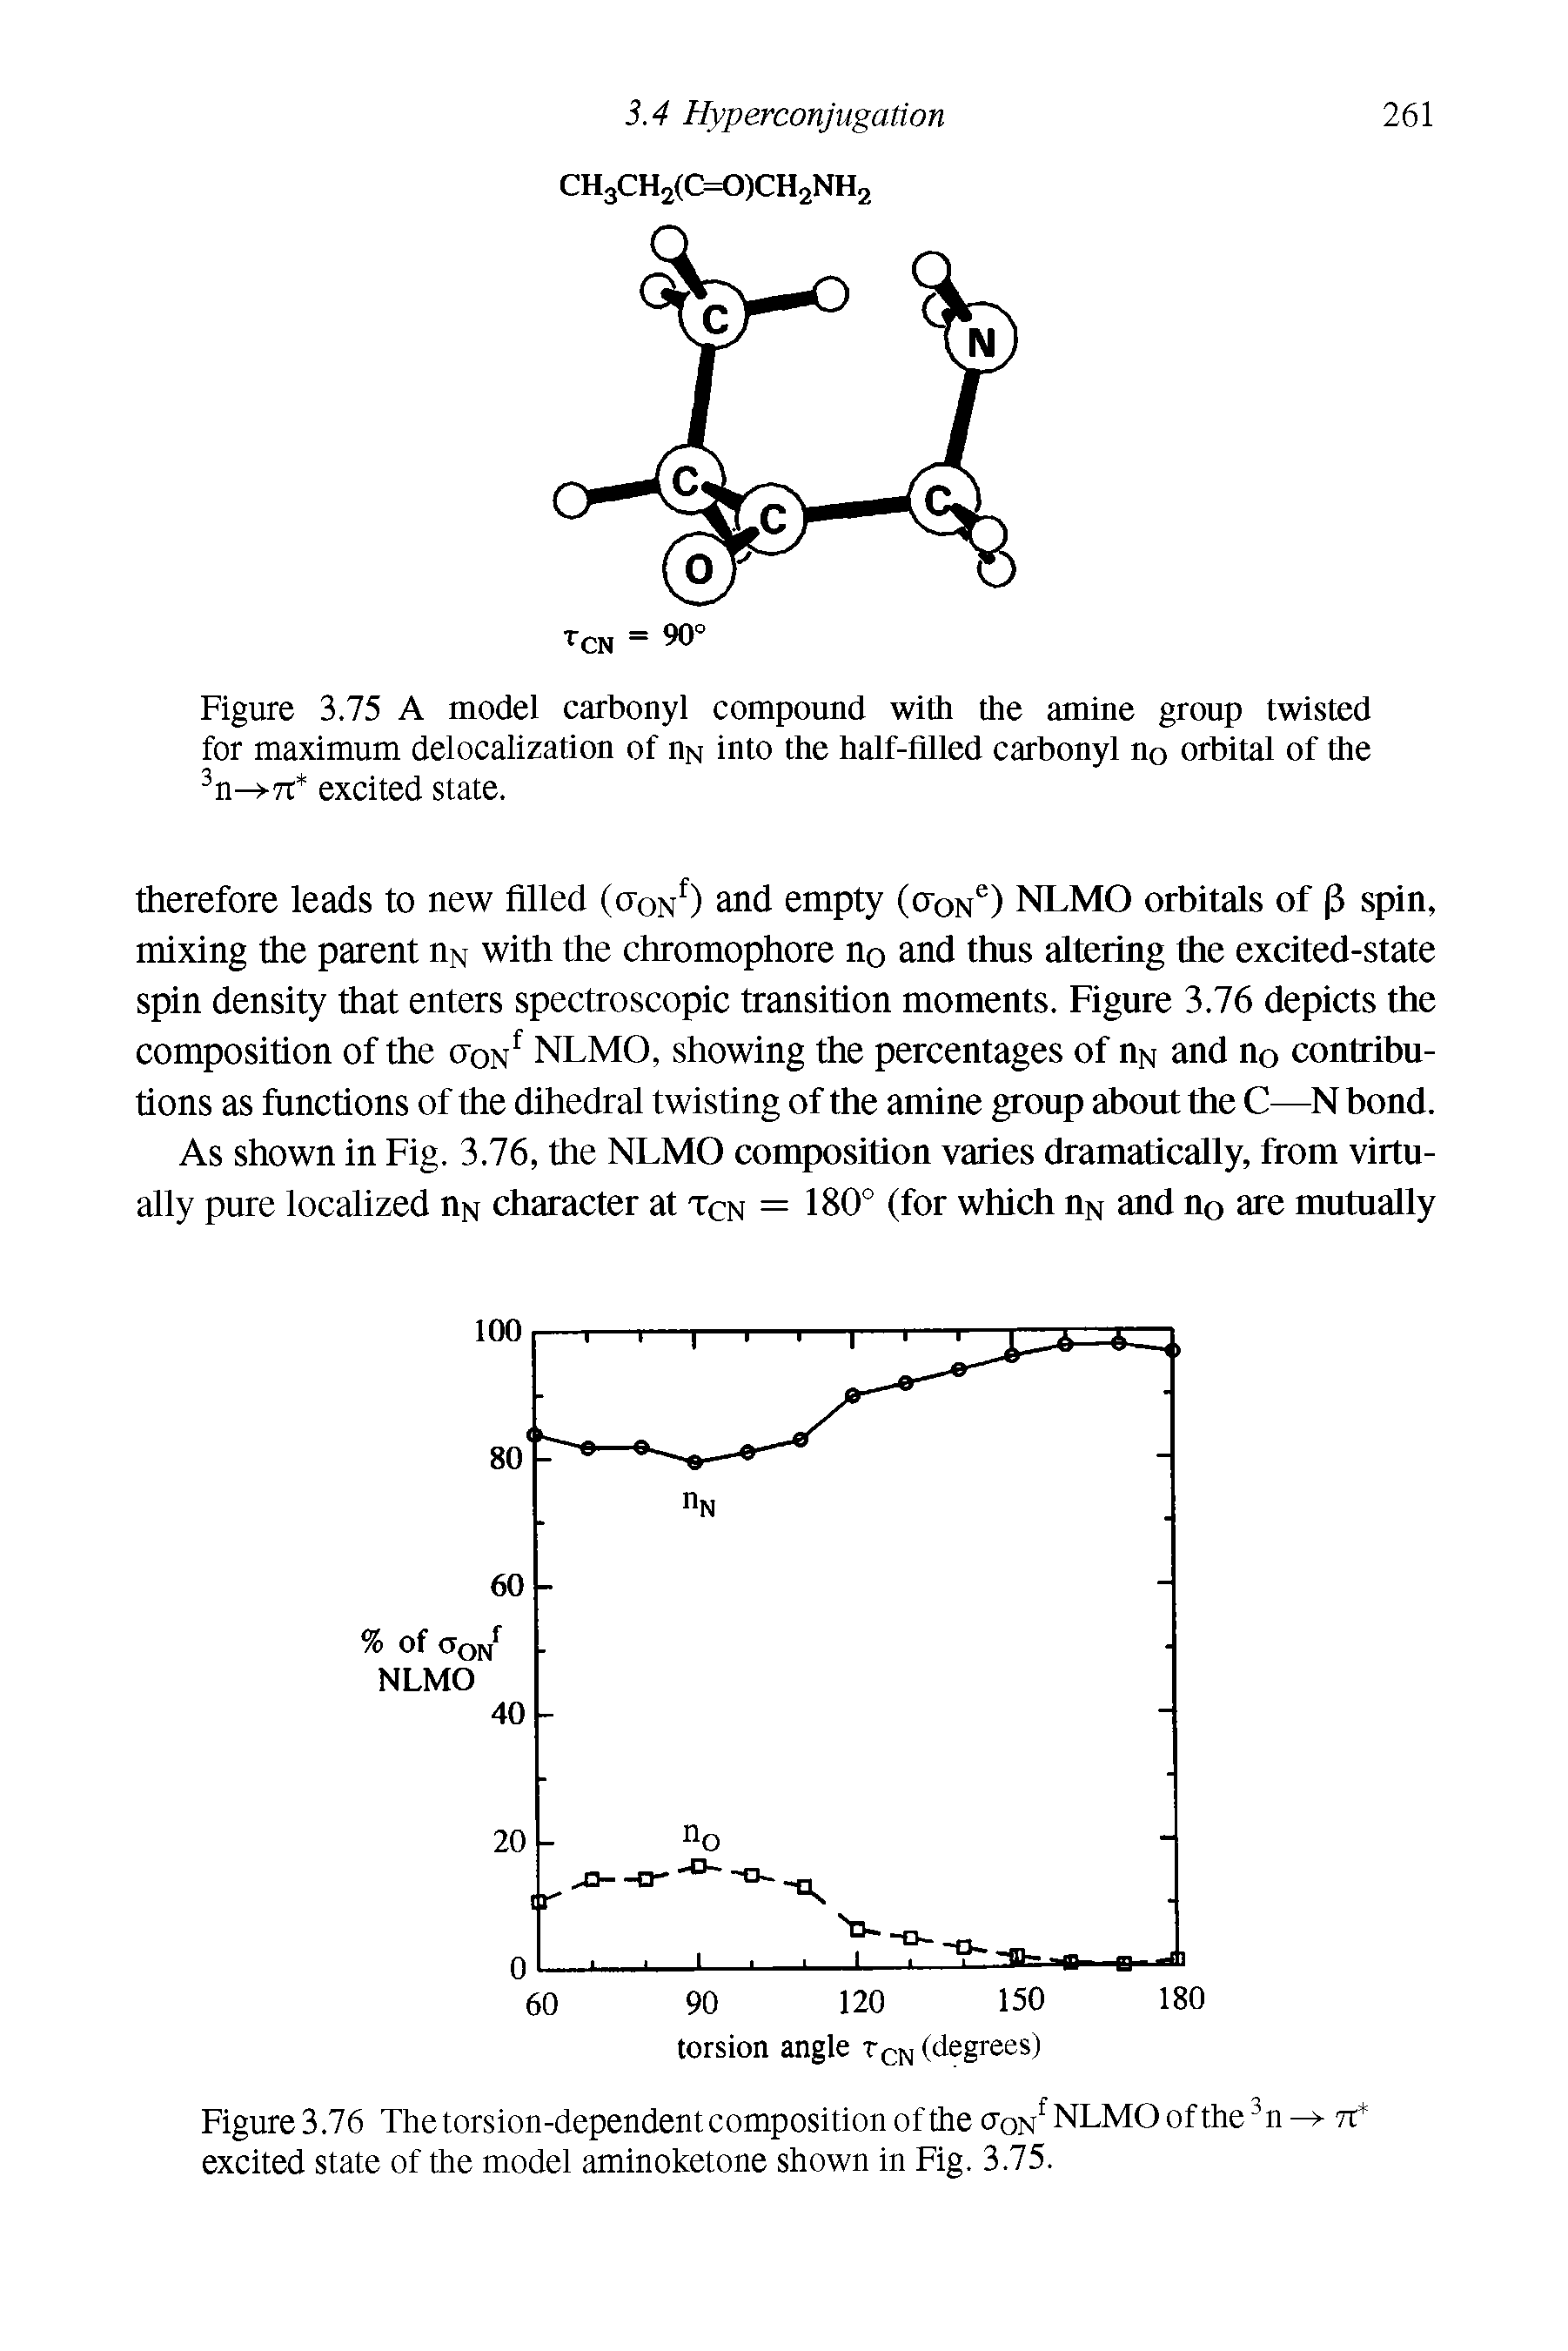 Figure 3.75 A model carbonyl compound with the amine group twisted for maximum delocalization of nN into the half-filled carbonyl n0 orbital of the 3n->-7T excited state.